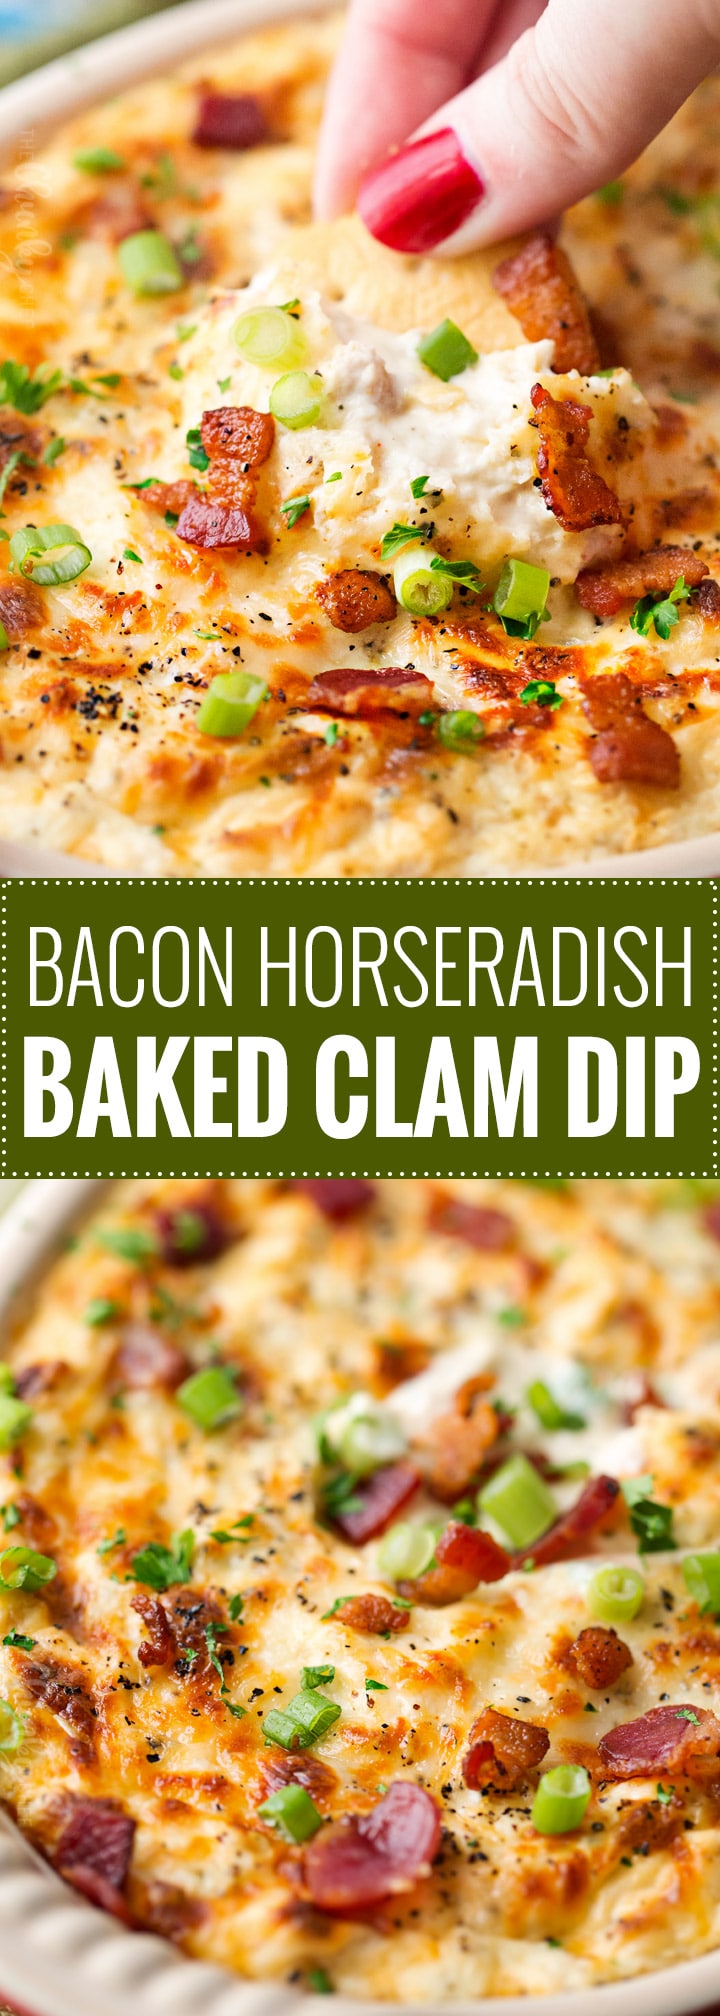 Bacon Horseradish Baked Clam Dip | This 5 ingredient clam dip is loaded with bold flavors and is incredibly easy to make for a party! | The Chunky Chef | #clamdip #bakedclamdip #partyfood #holidaydip #diprecipes